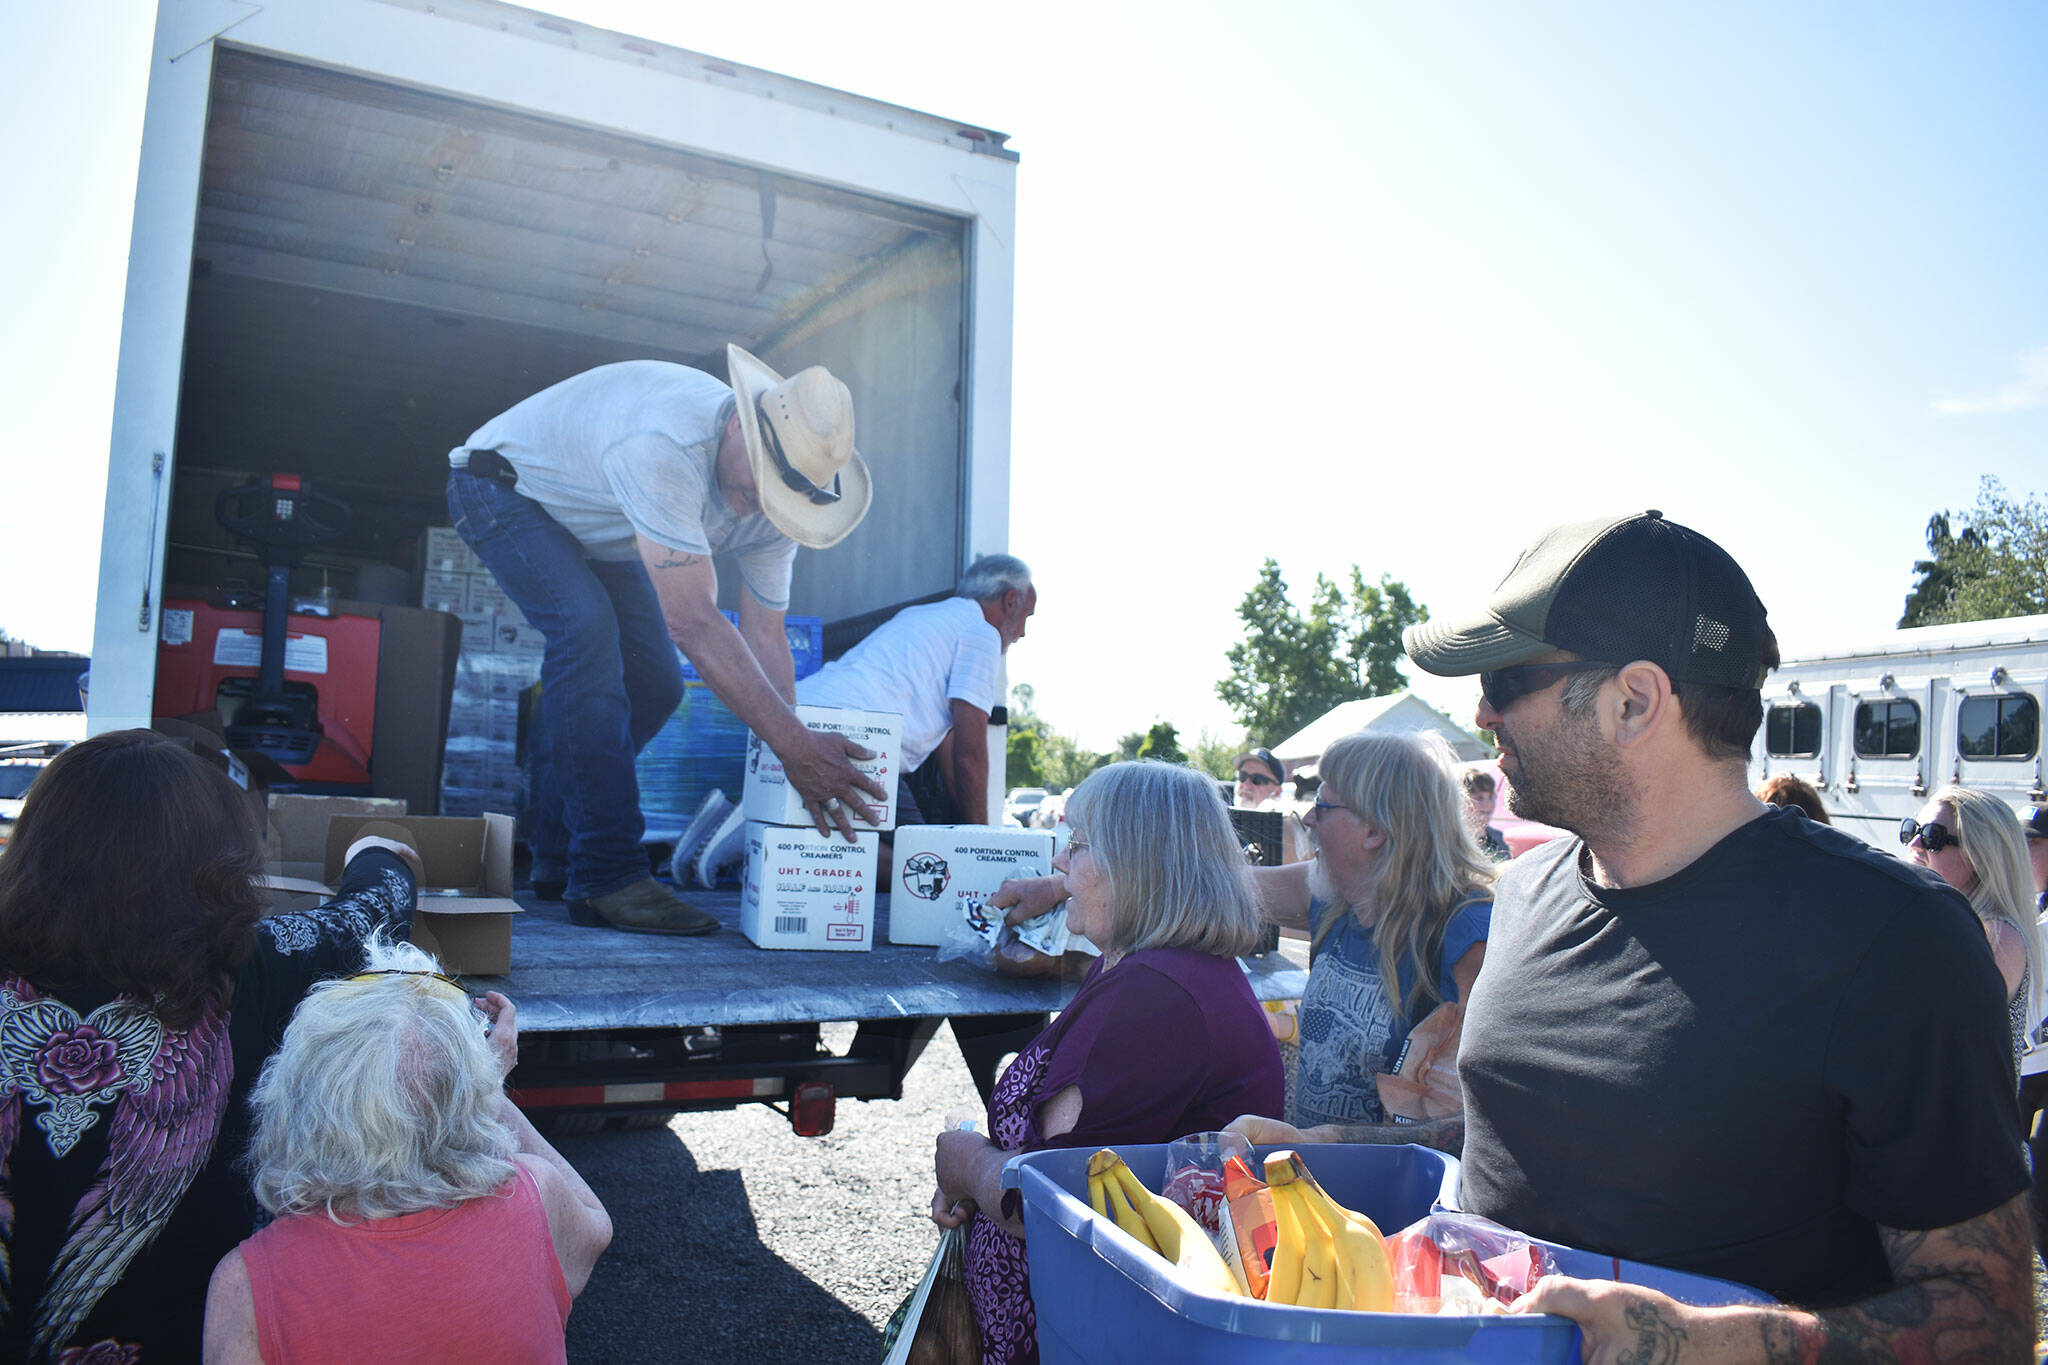 Photo by Alex Bruell
Jay Hill (cowboy hat) and Bill Petersen, warehouse supervisors at the Sumner Food Bank, unload food for families on July 13 in the parking lot of the Buckley Eagles’ hall atop their truck from the Sumner Food Bank.